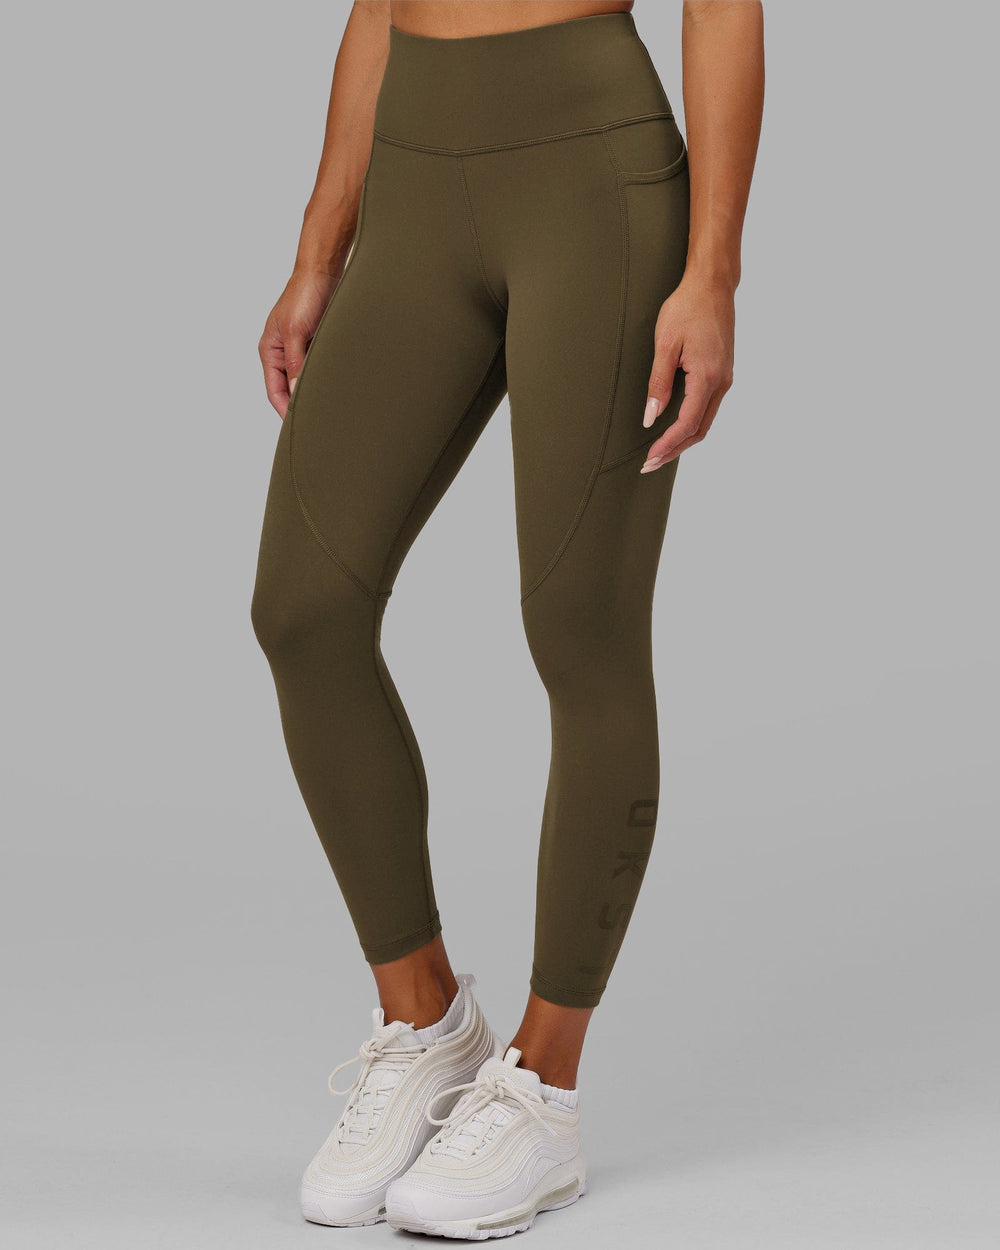 Rep Full Length Tights - Army Green